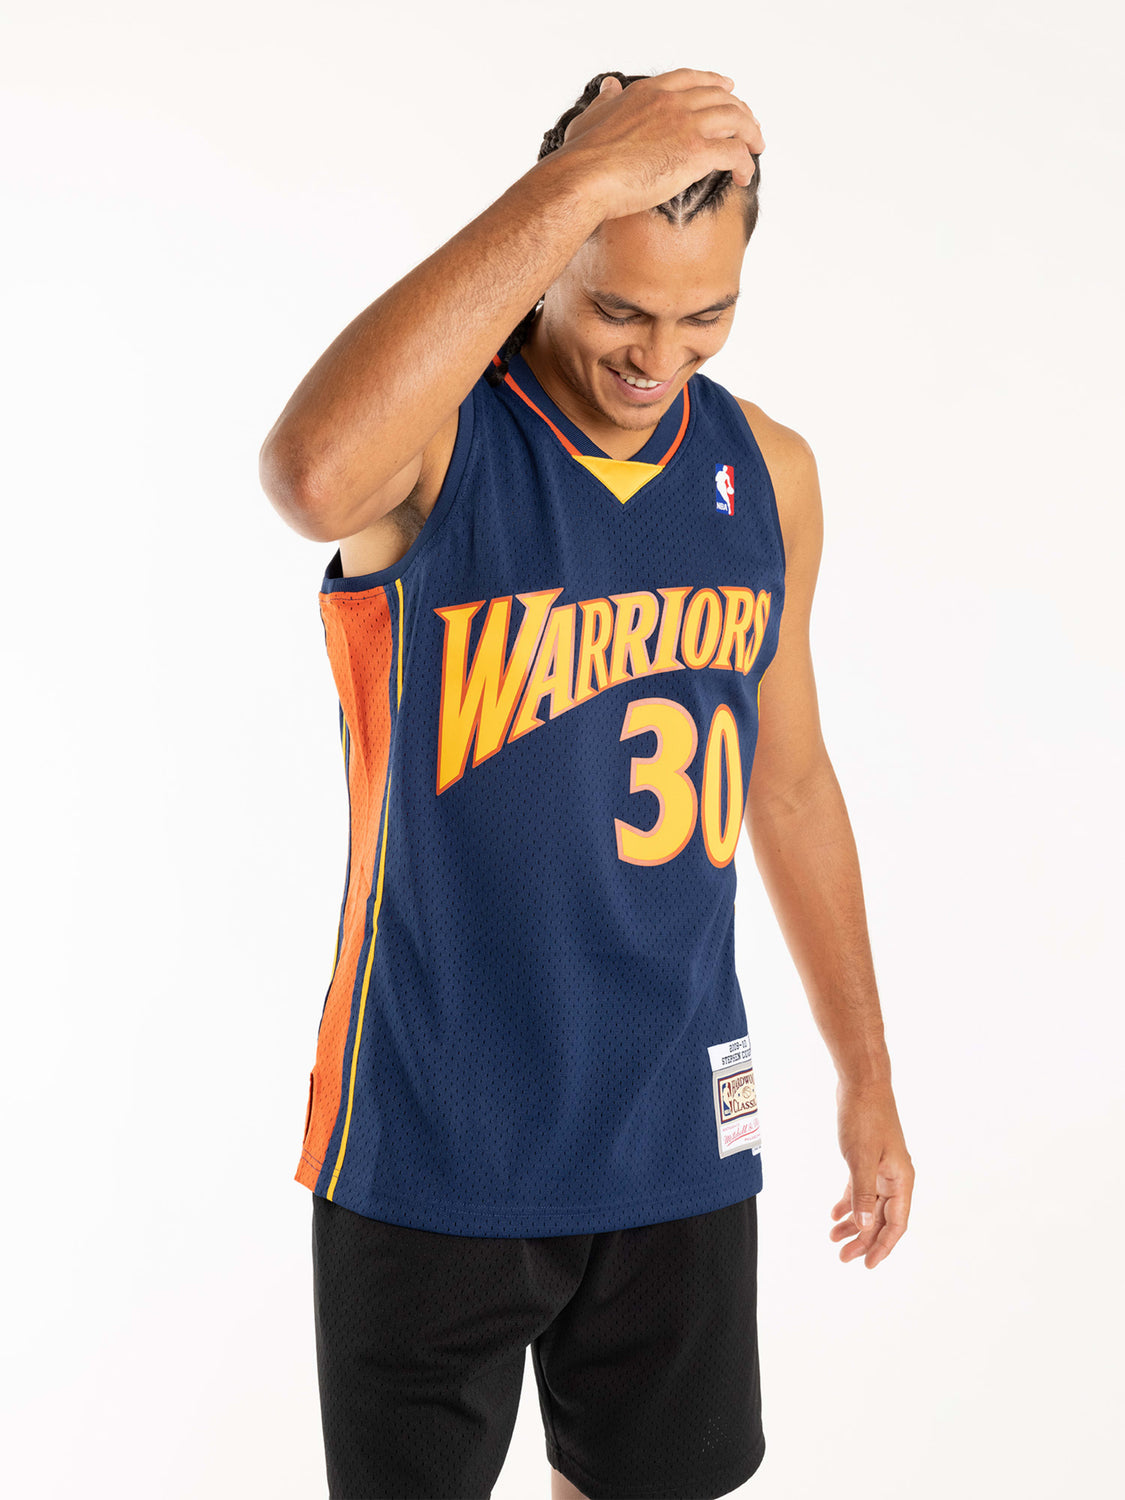 Mitchell & Ness Swingman Jersey Golden State Warriors Road 2009-10 Stephen Curry Large